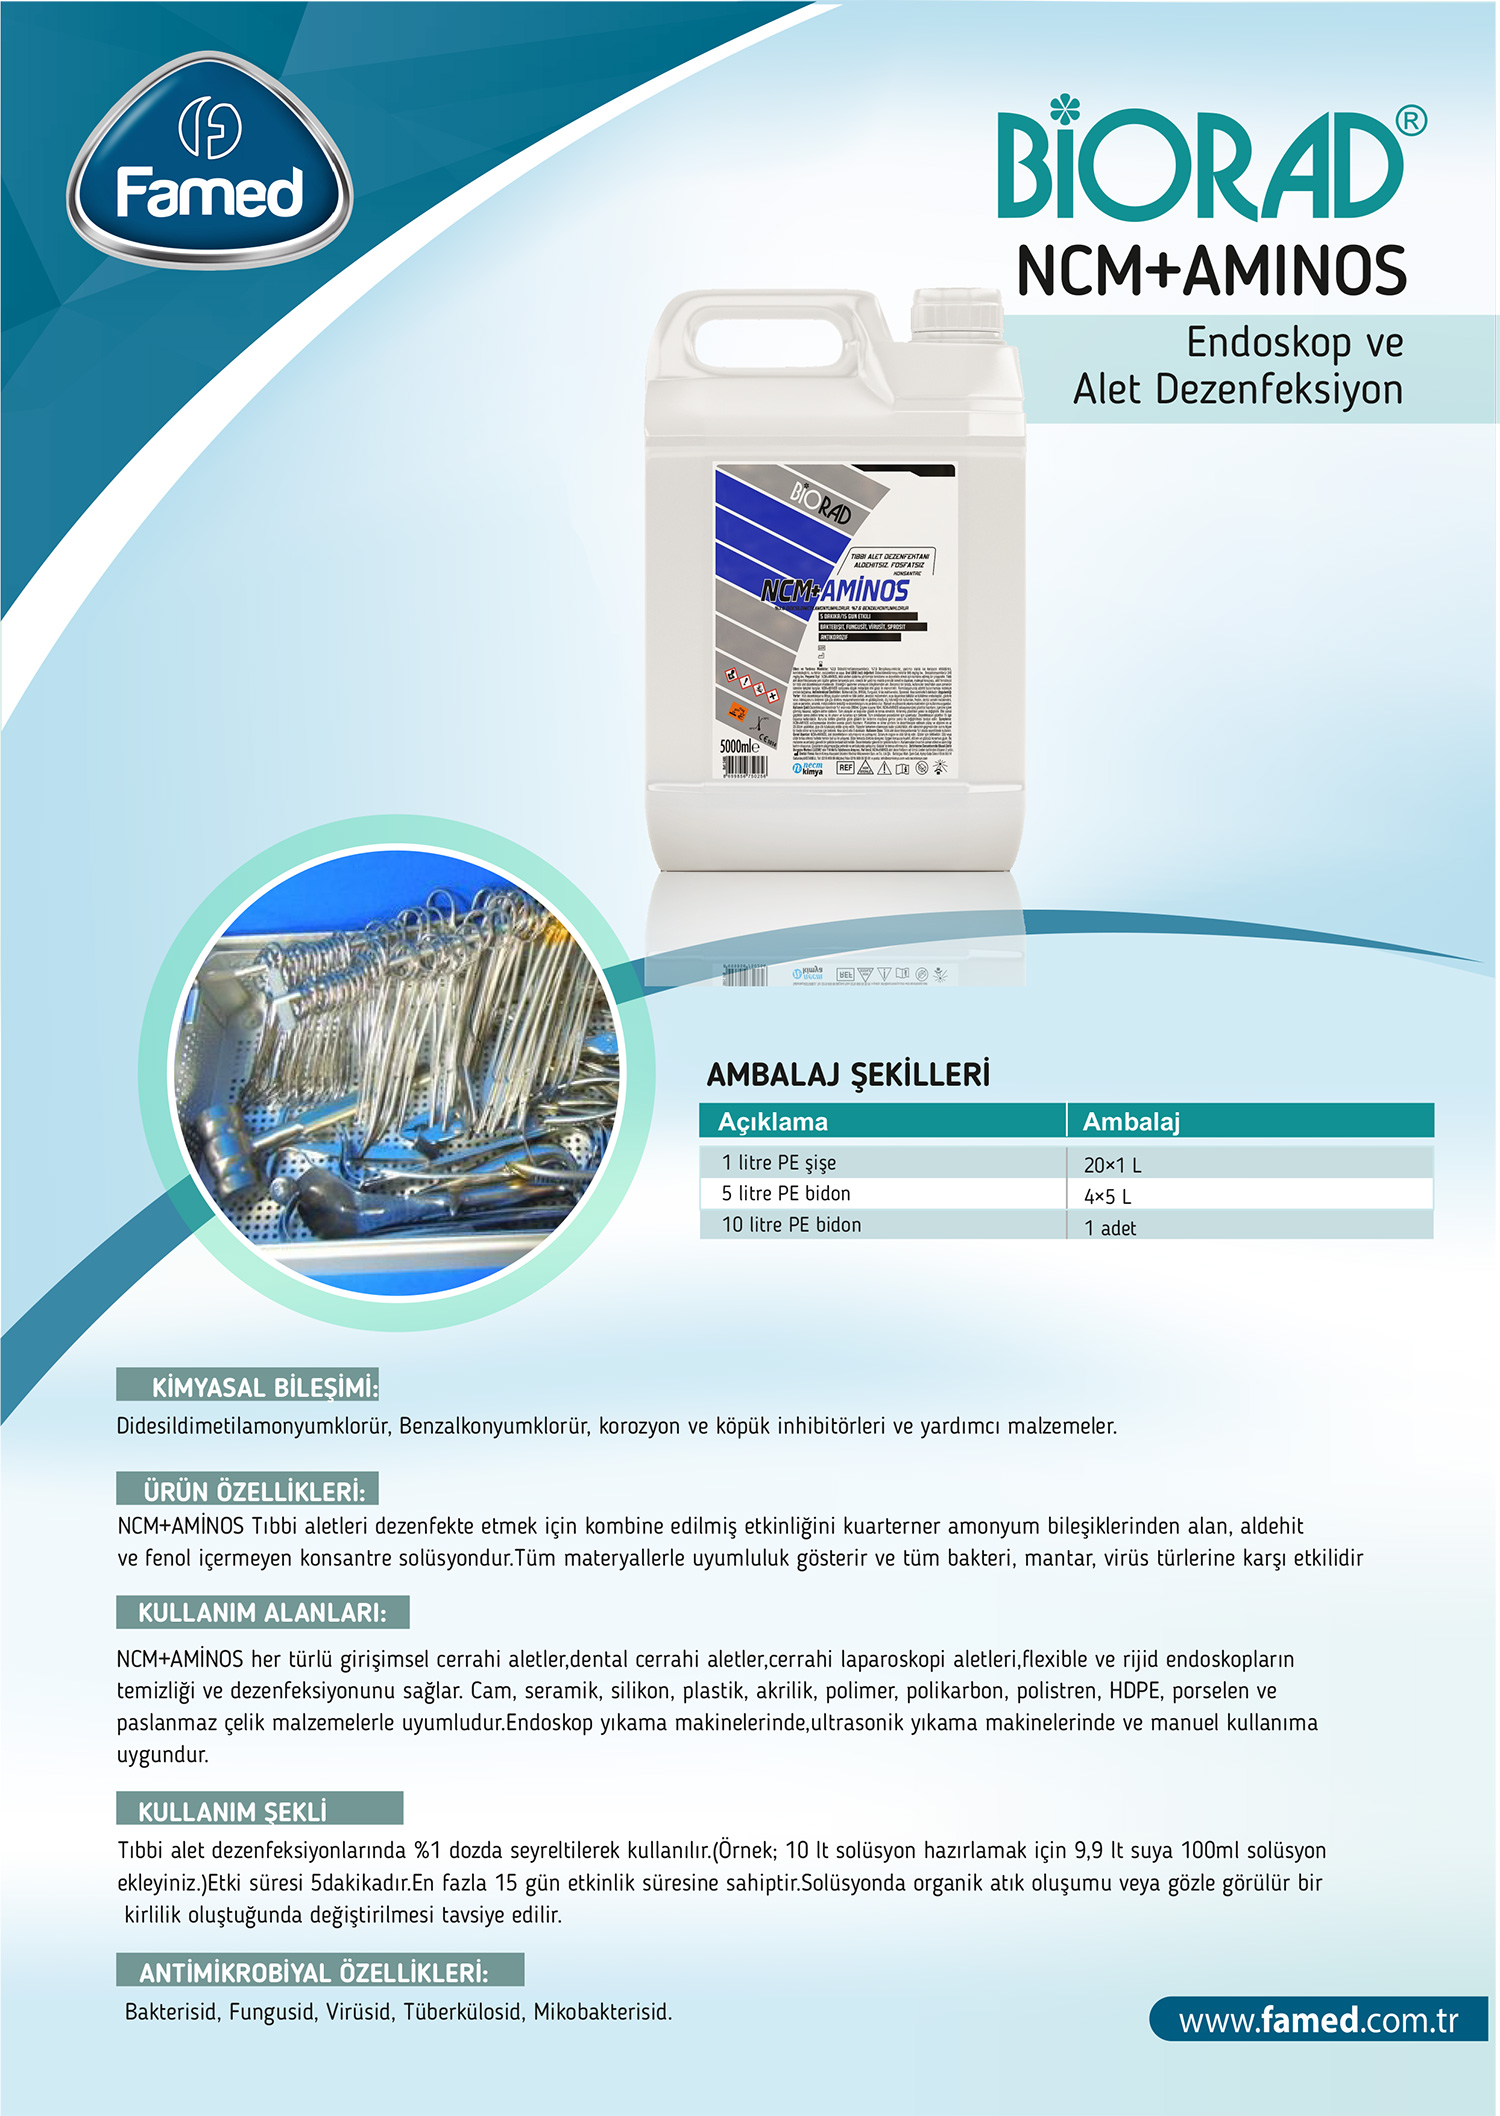 NCM Aminos Endoscope And Medical Instrument Disinfection